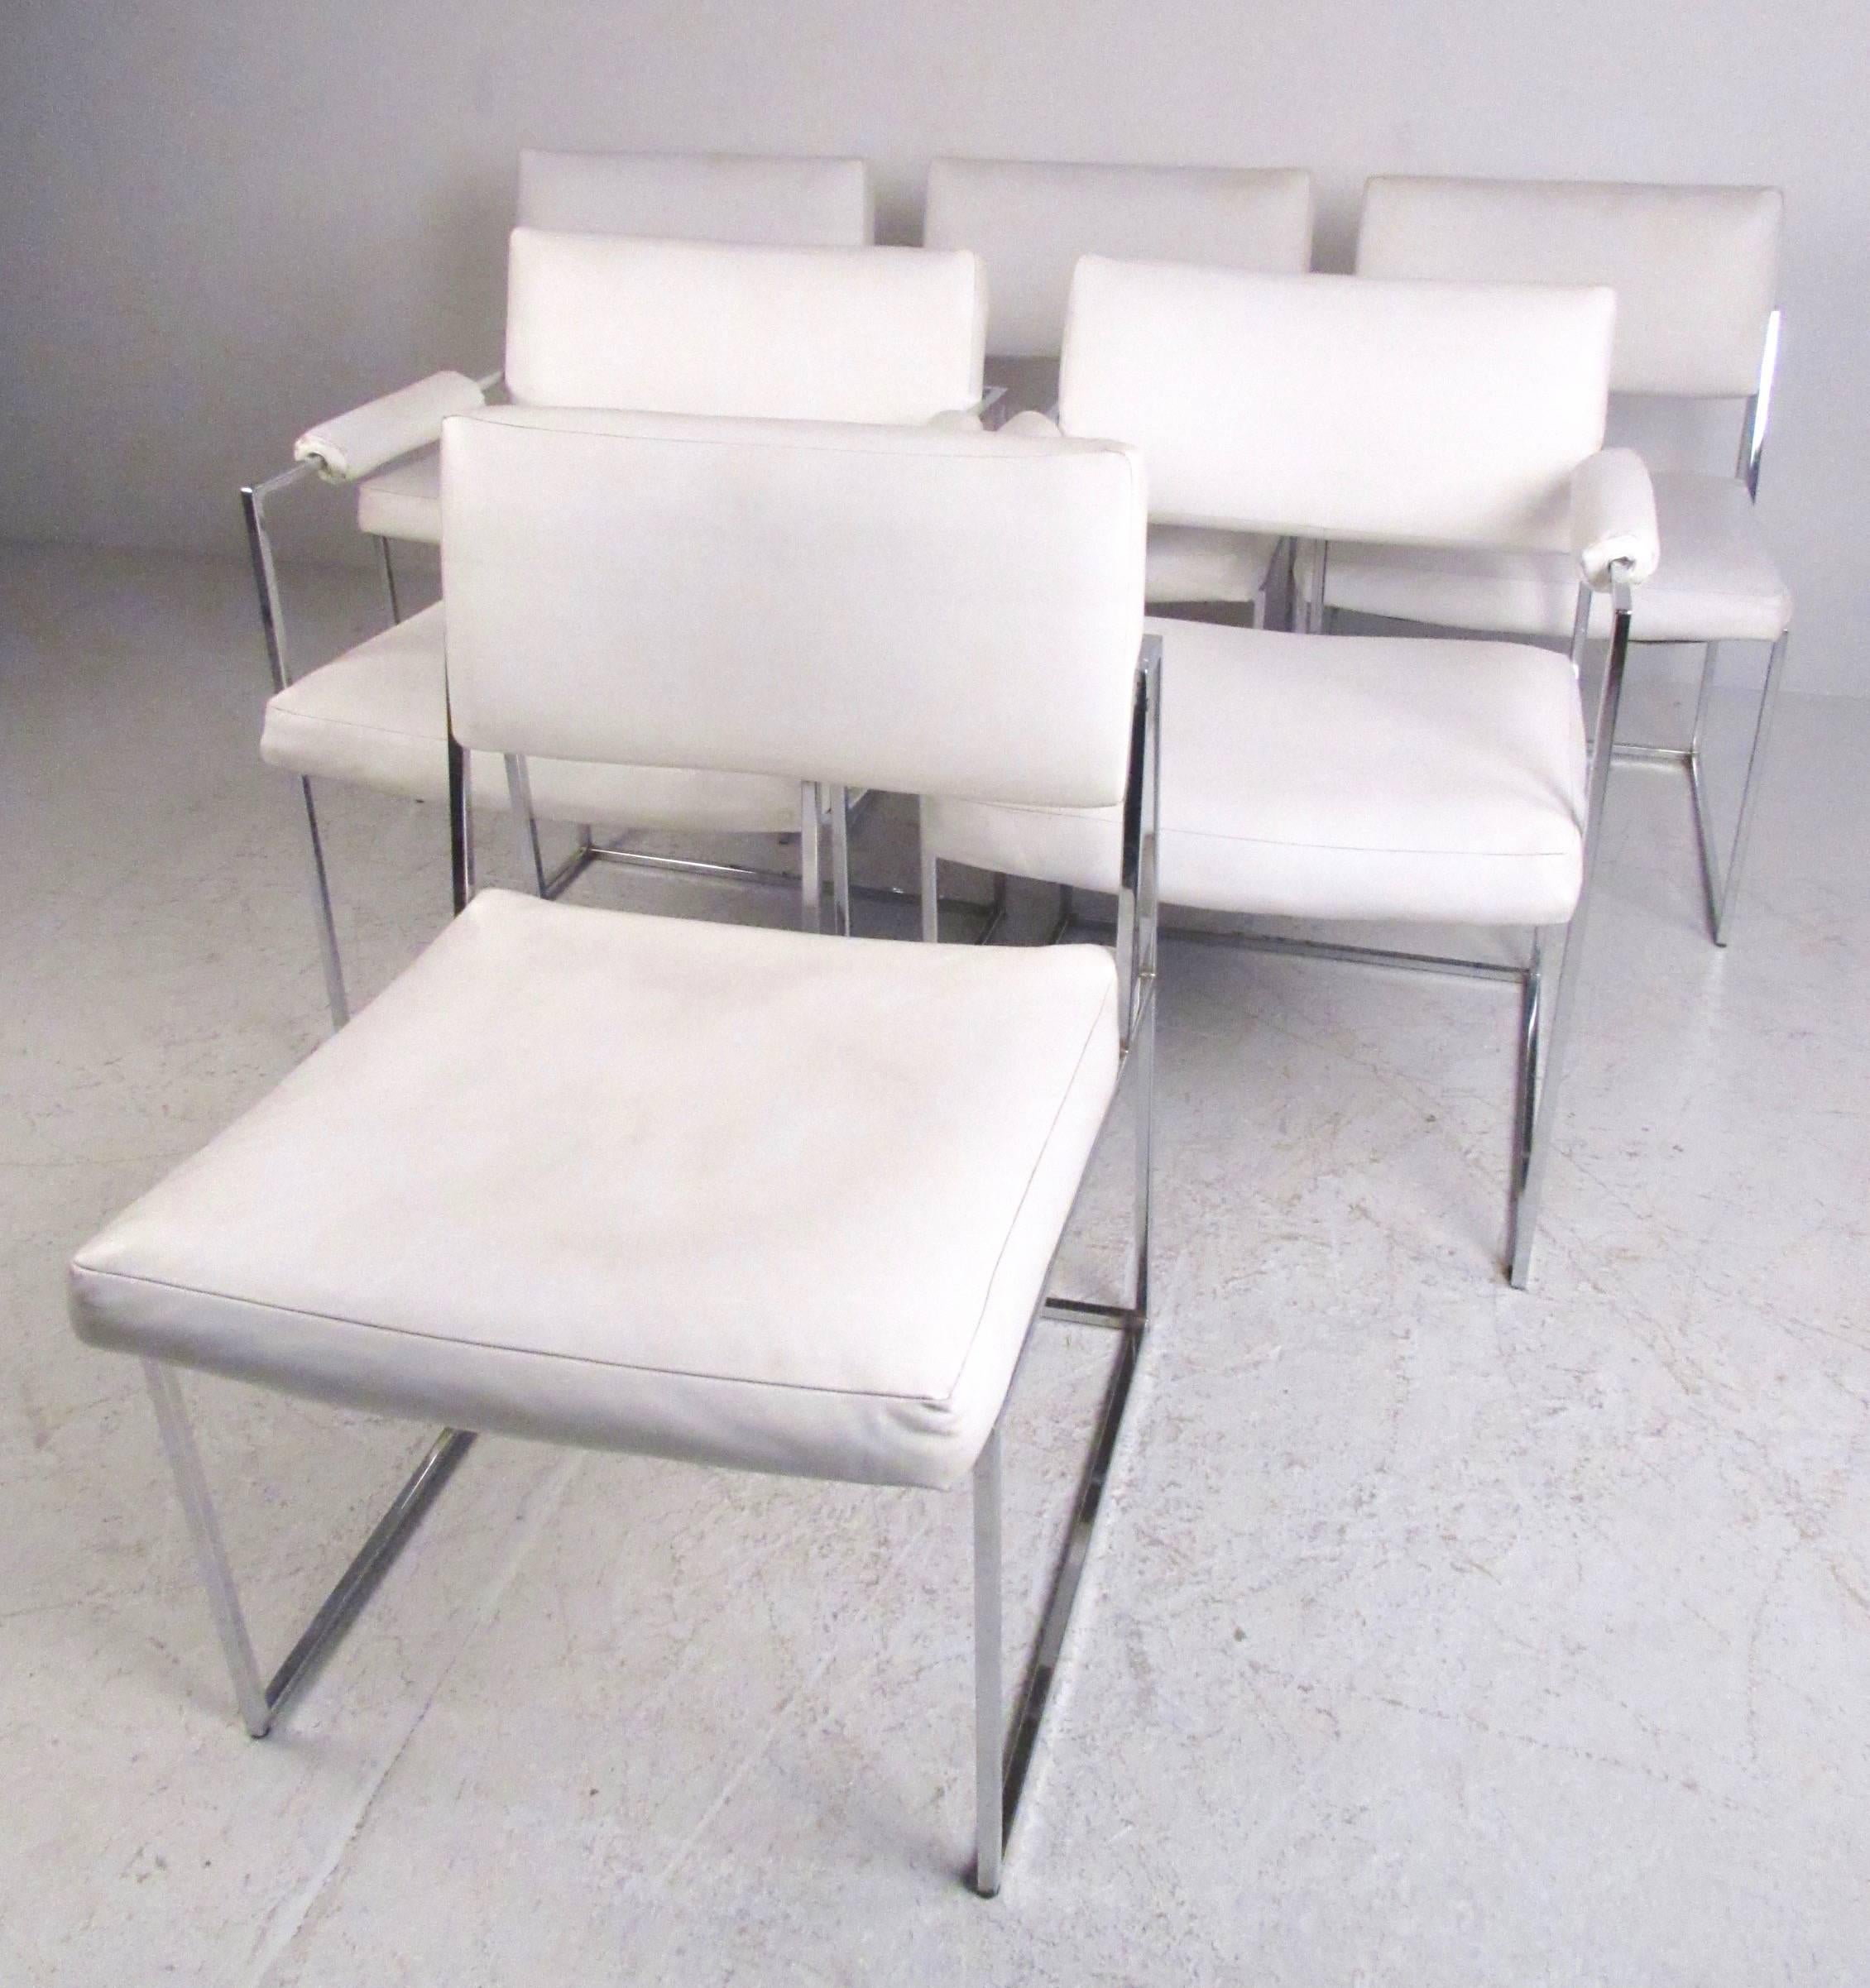 This stylish set of six chrome and vinyl dining chairs offer wide and well cushioned seats, comfortable upholstered seat backs, and a pair of matched arm chairs. The vintage modern Milo Baughman style design makes an impressive addition to any